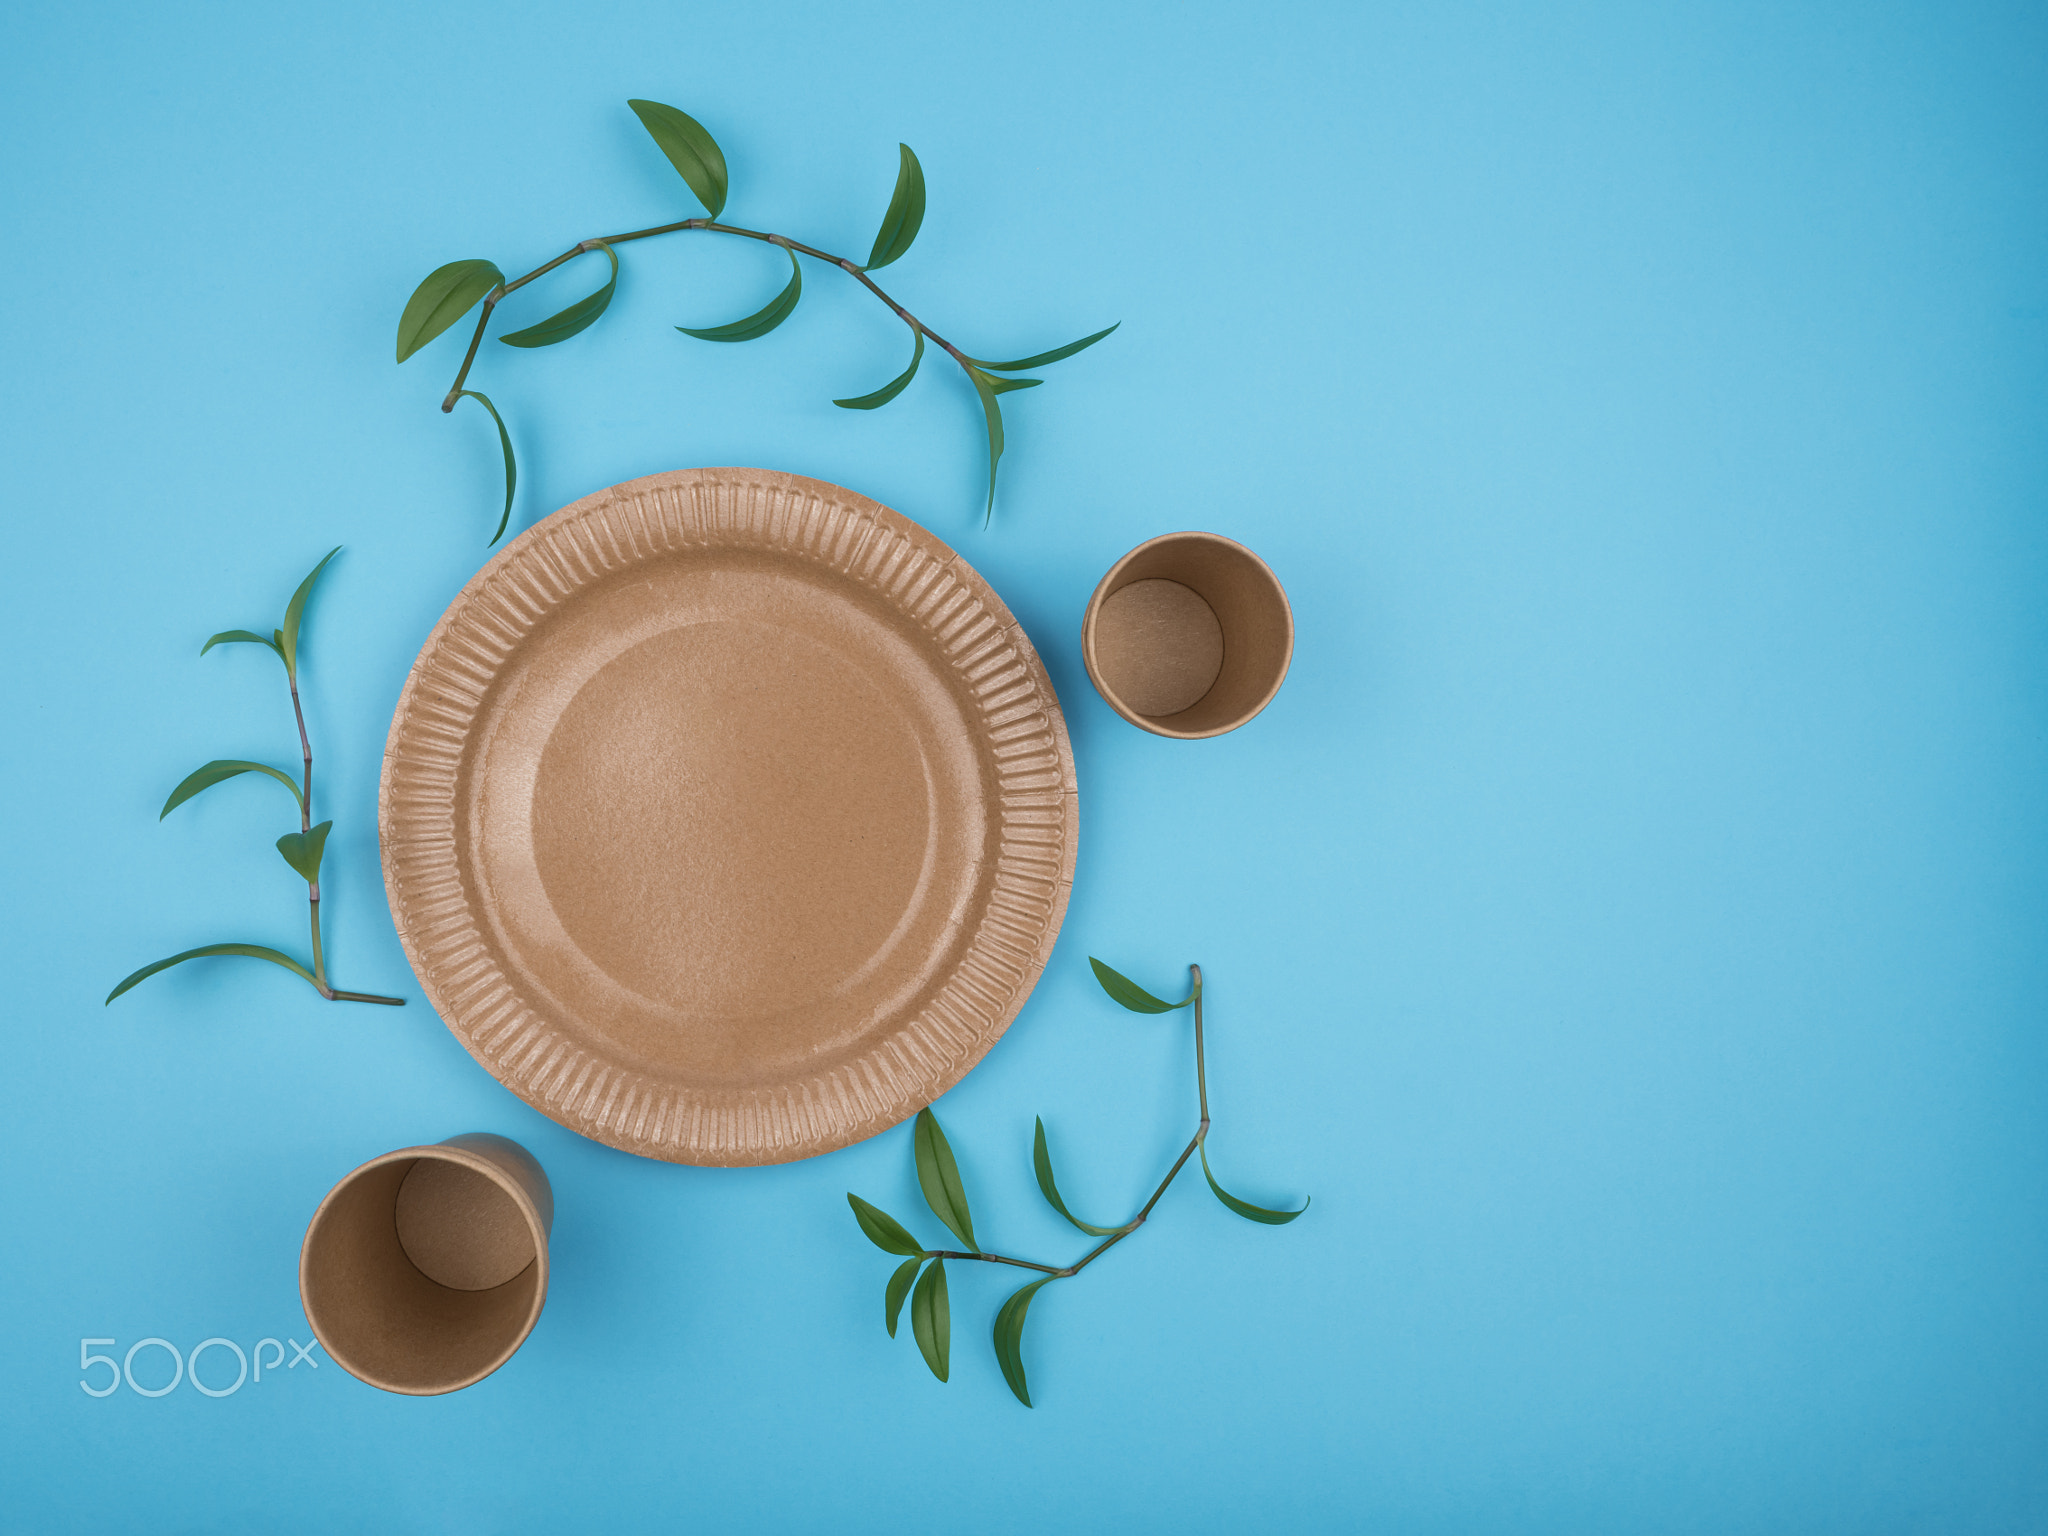 Paper disposable cups and plates on a blue background.